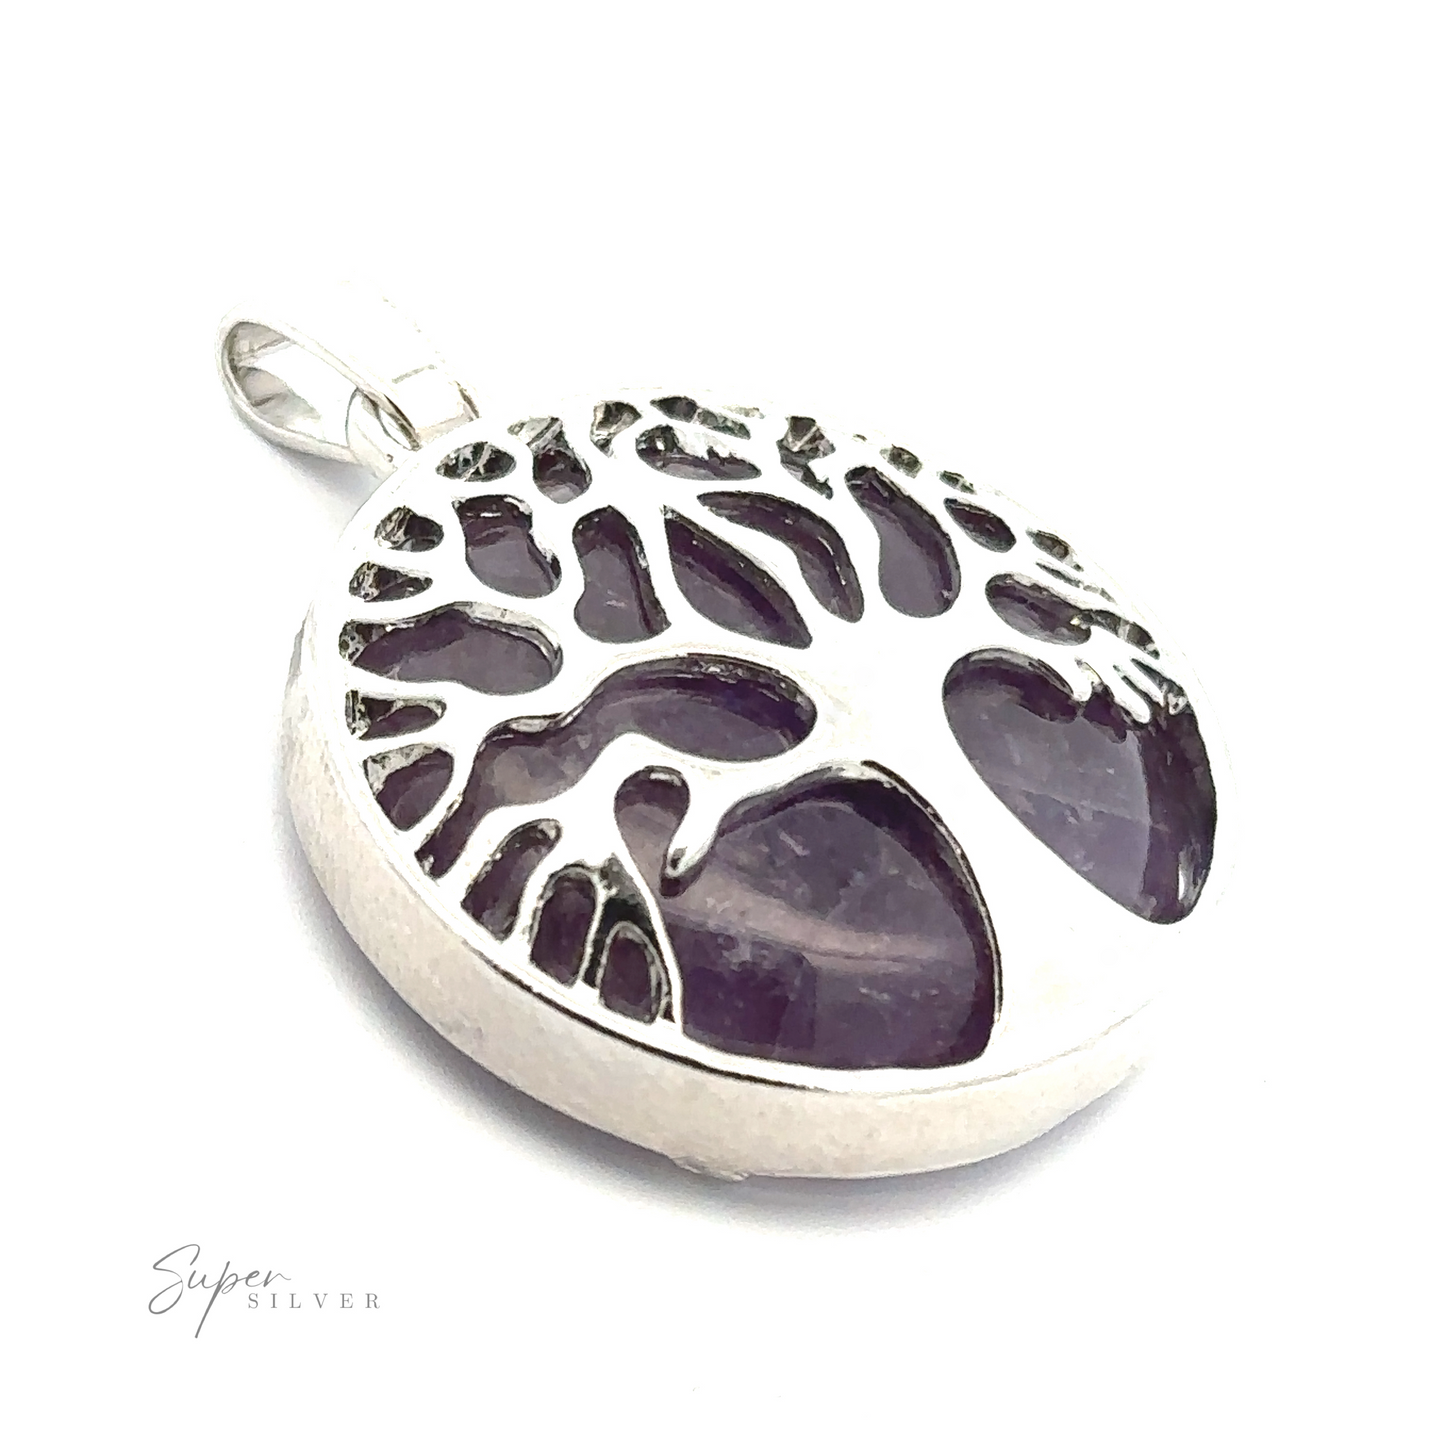 
                  
                    A Tree of Life Pendant featuring a Tree of Life design with purple gemstone insets. The text "Super Silver" is visible at the bottom left.
                  
                